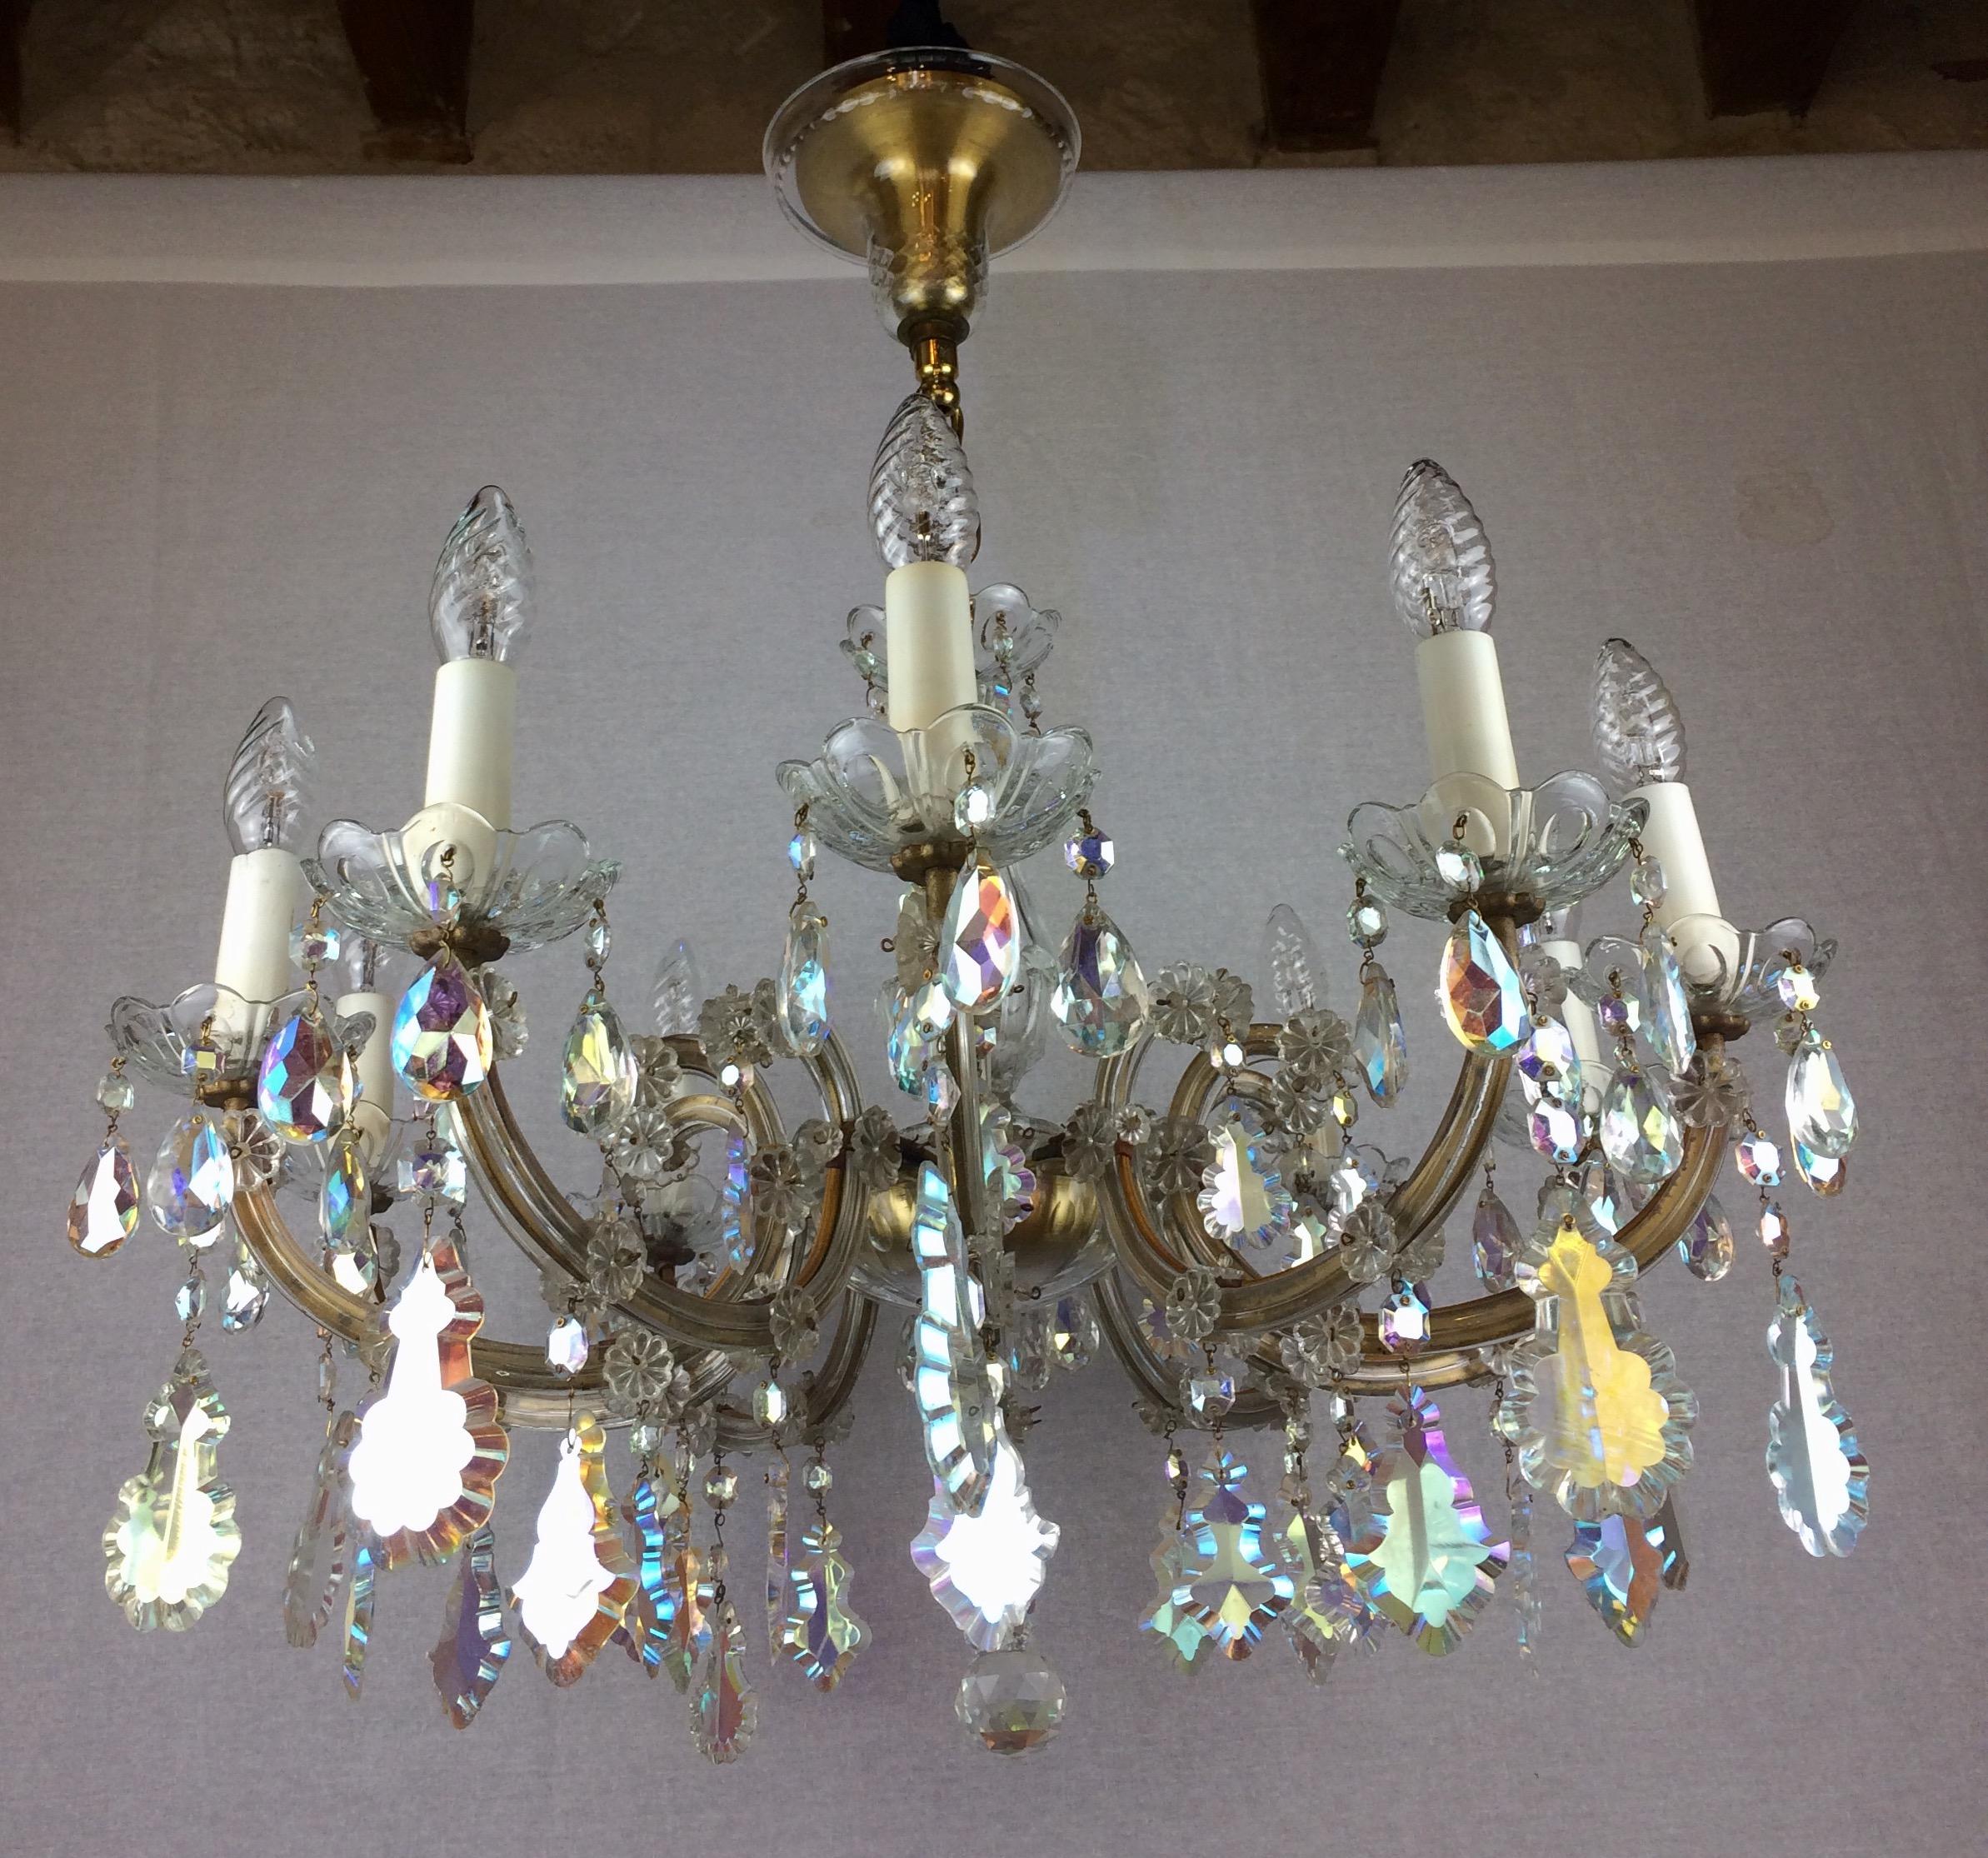 20th Century French Marie Therese Chandelier with Colored Rock Crystals 10 Arms For Sale